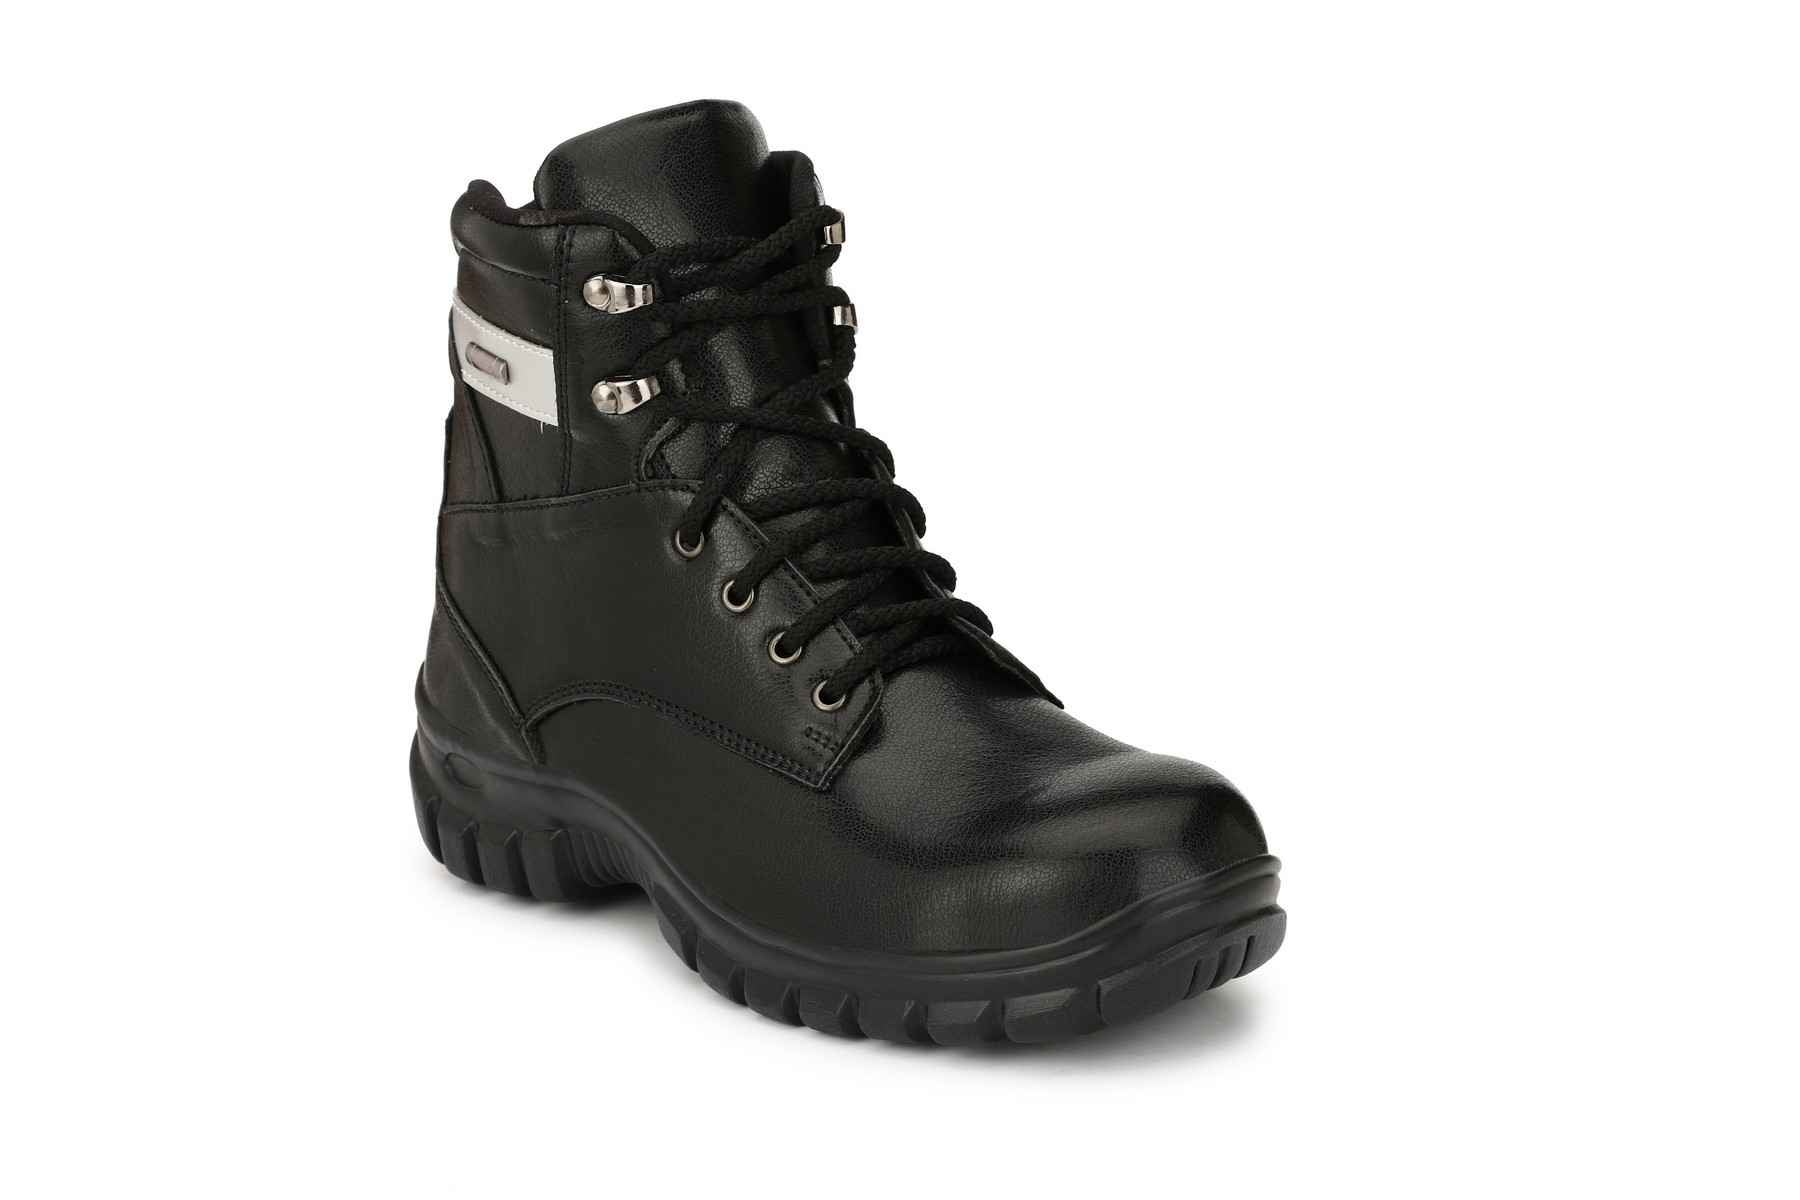 kavacha safety shoes online